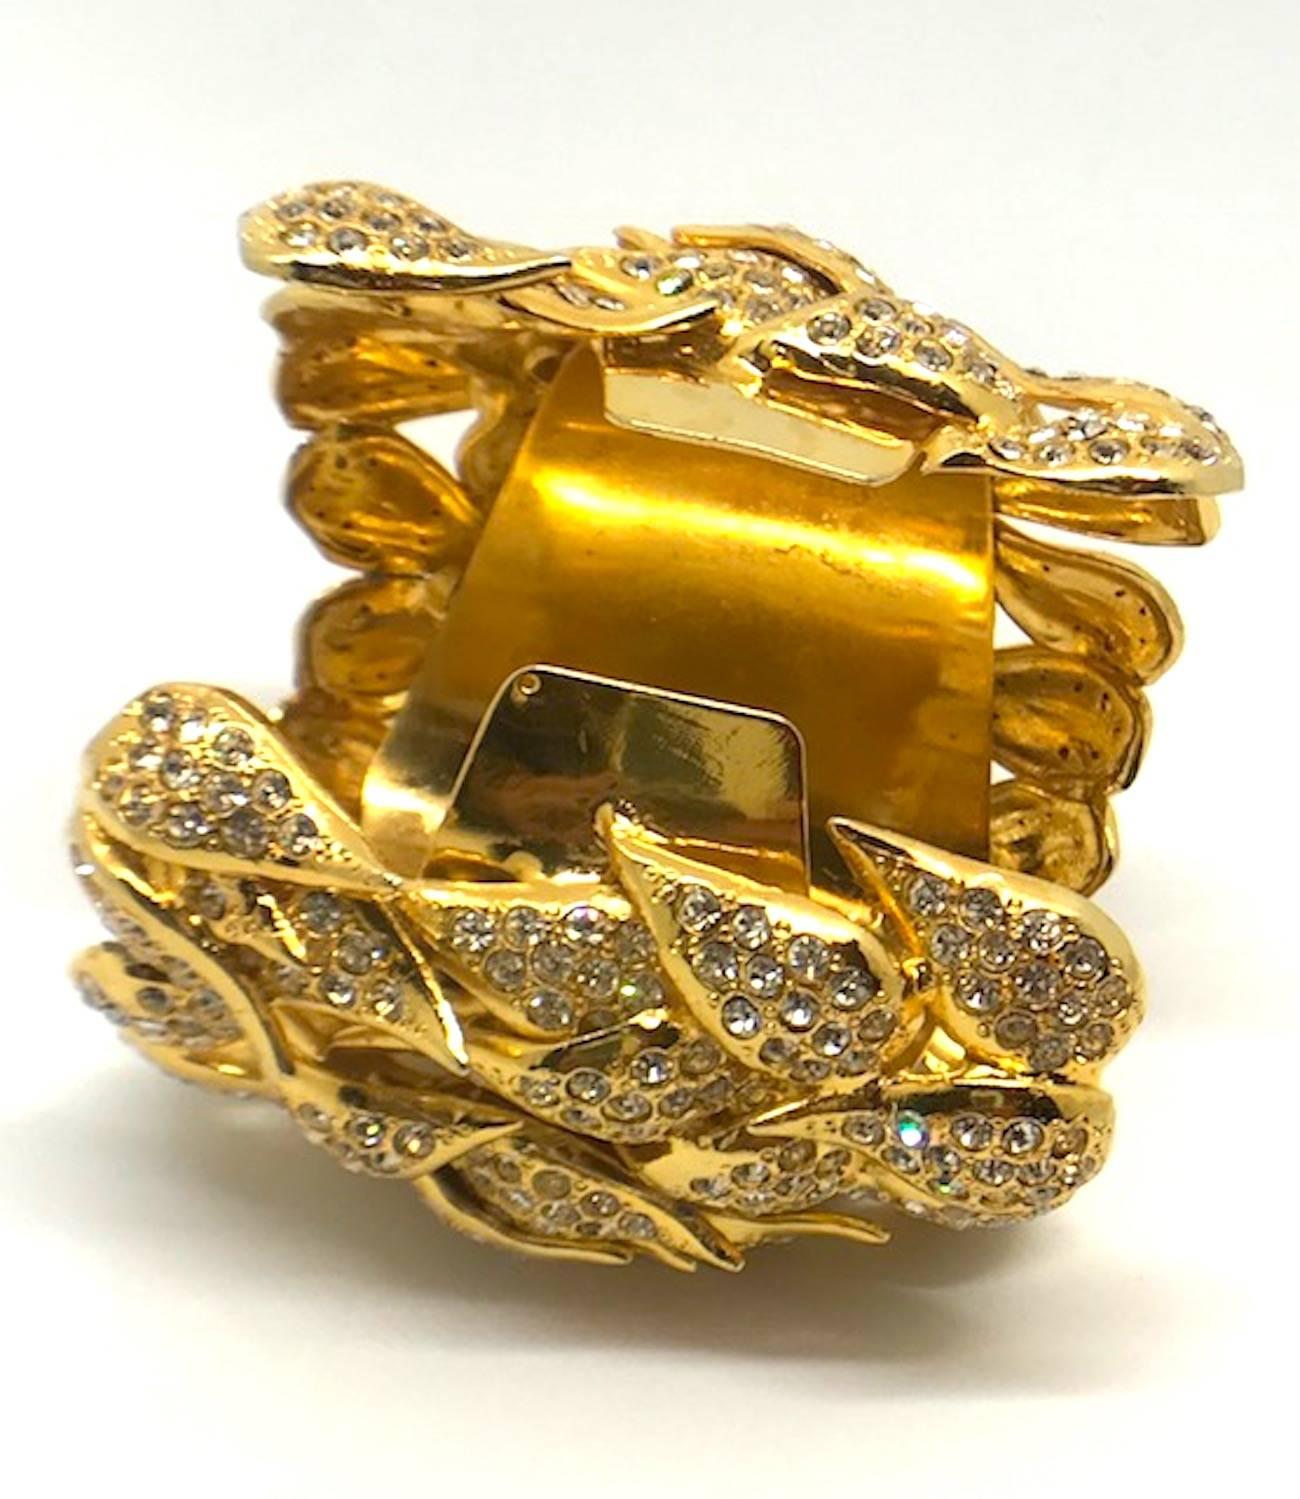 Contemporary De Liguoro gold cuff bracelet from Actress Elsa Martinelli's personal collection